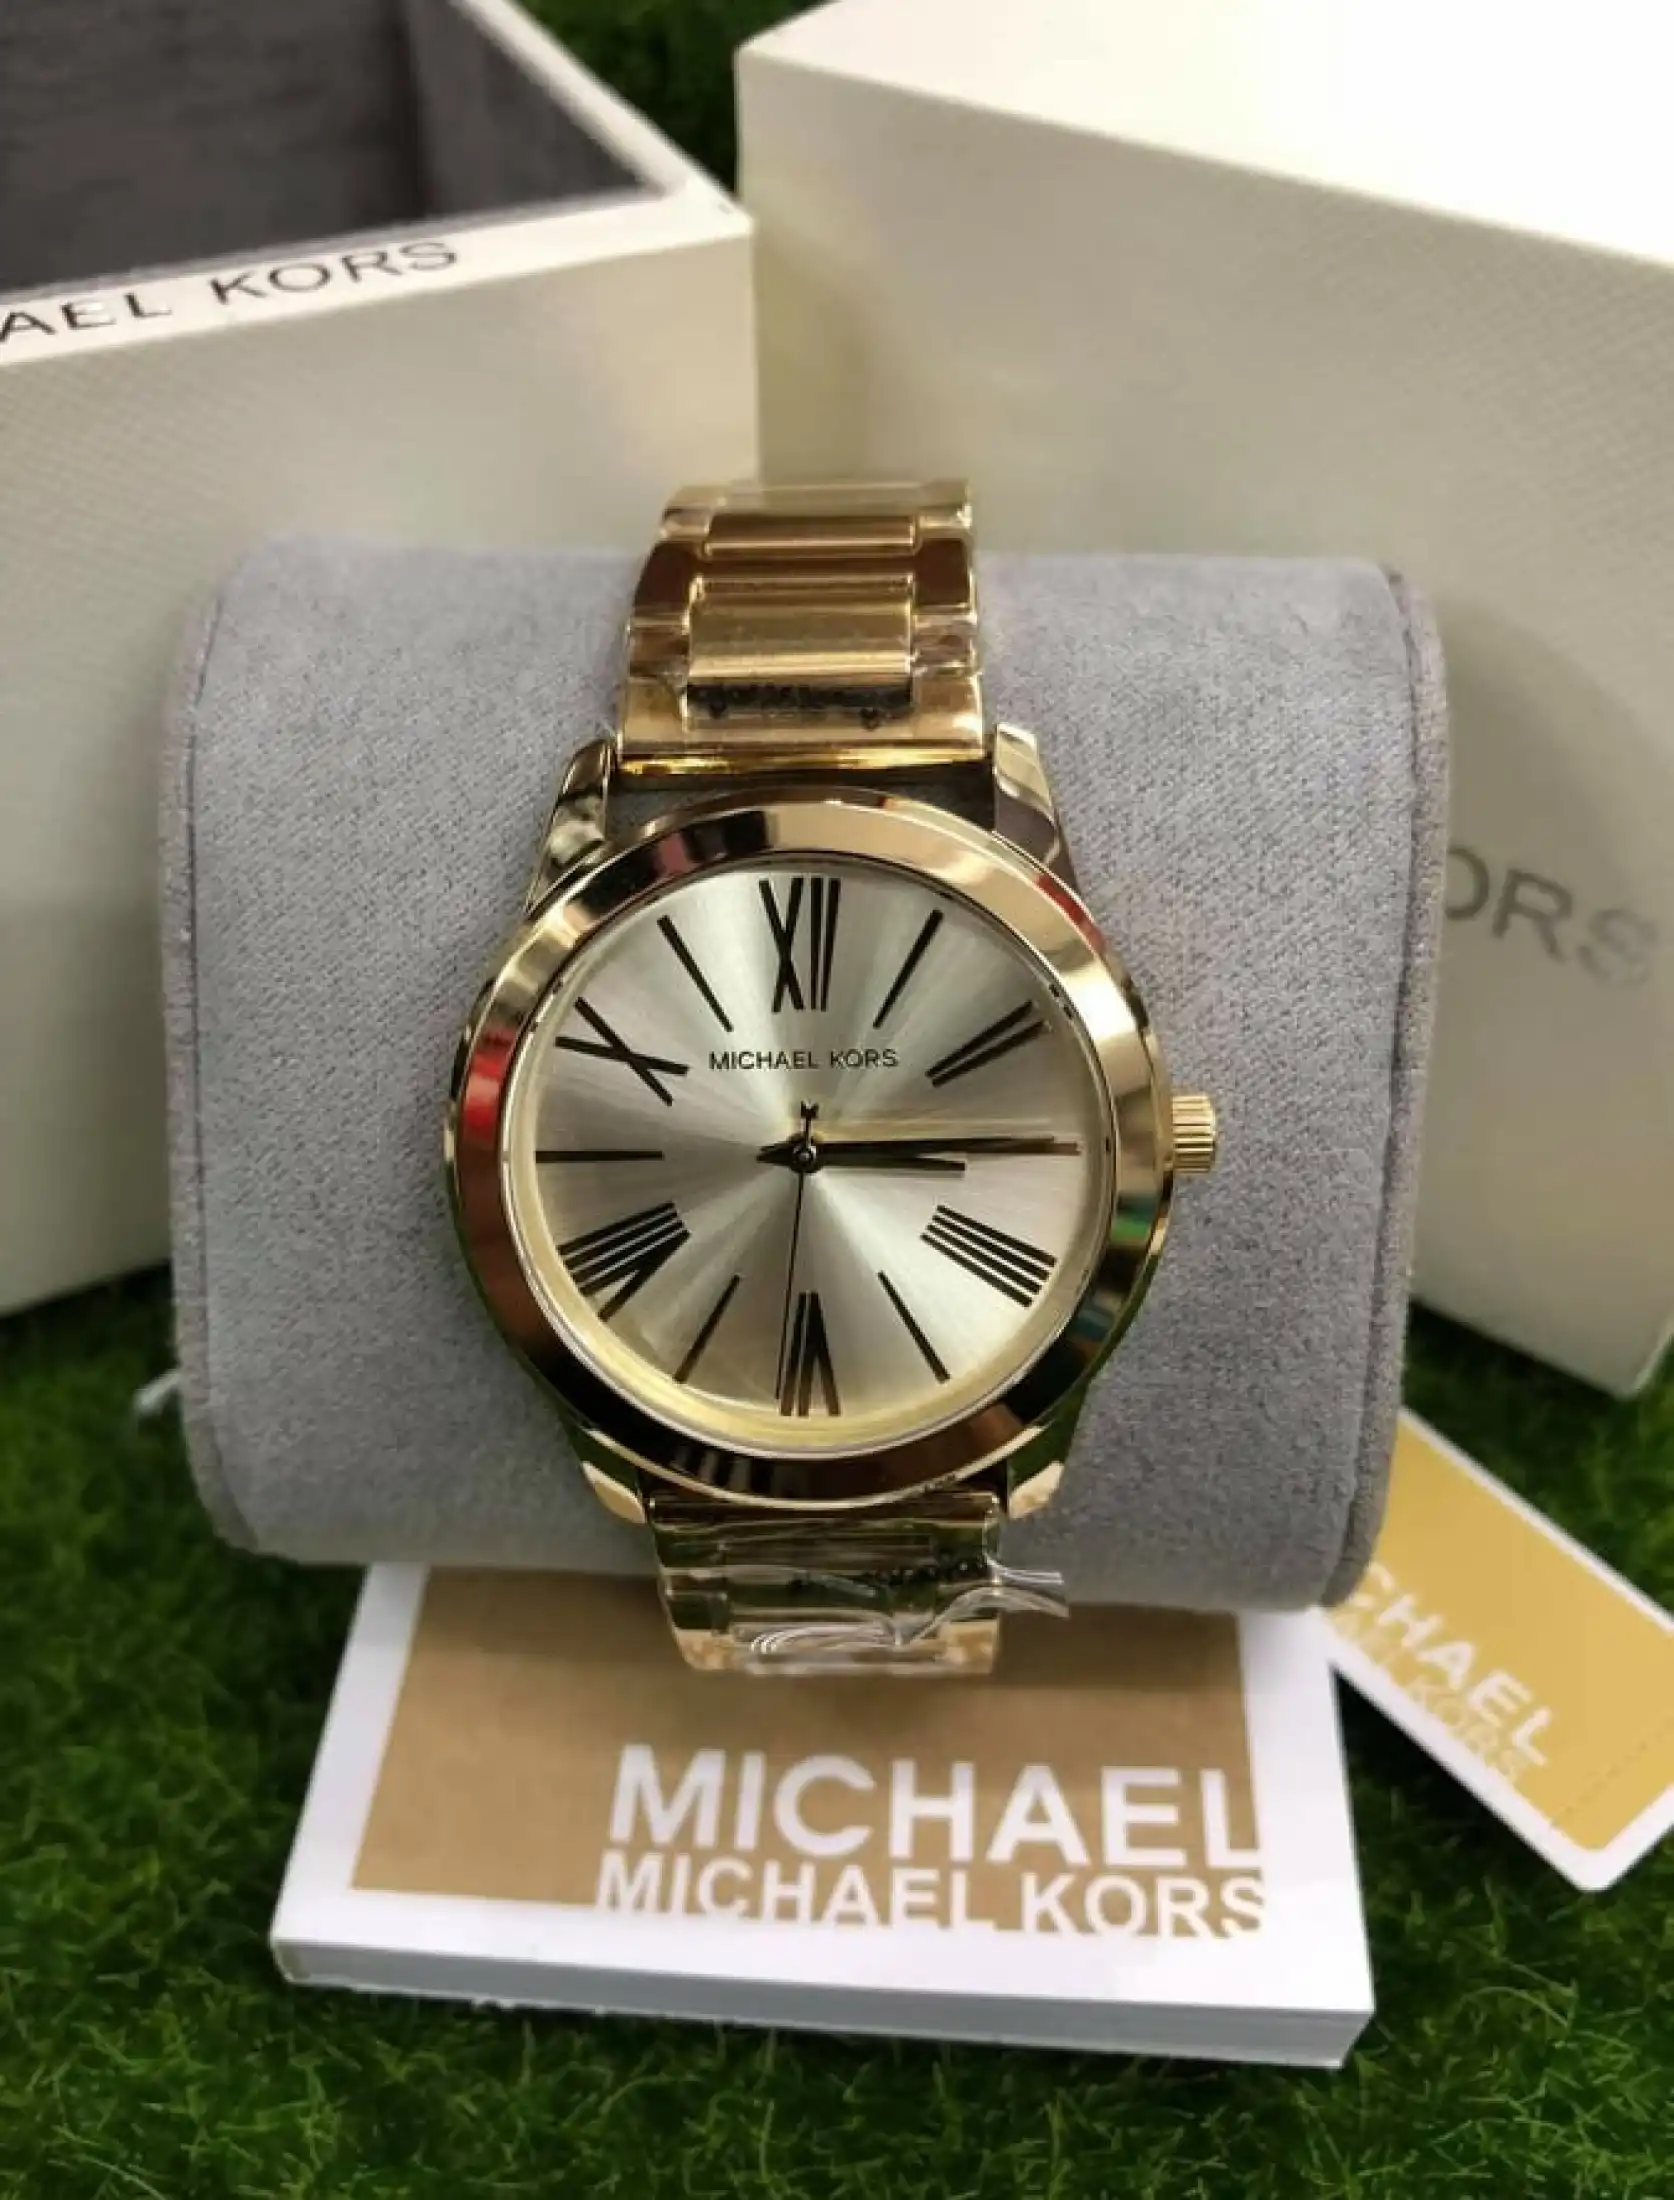 have på blandt lanthan Tekpinoy - Michael Kors watch SLIMWAY U.S HIGH GRADE QUALITY WATCH AT LOWEST  PRICE AND BEST SELLER AUTHENTIC NON TARNISH STAINLESS STEEL | Lazada PH